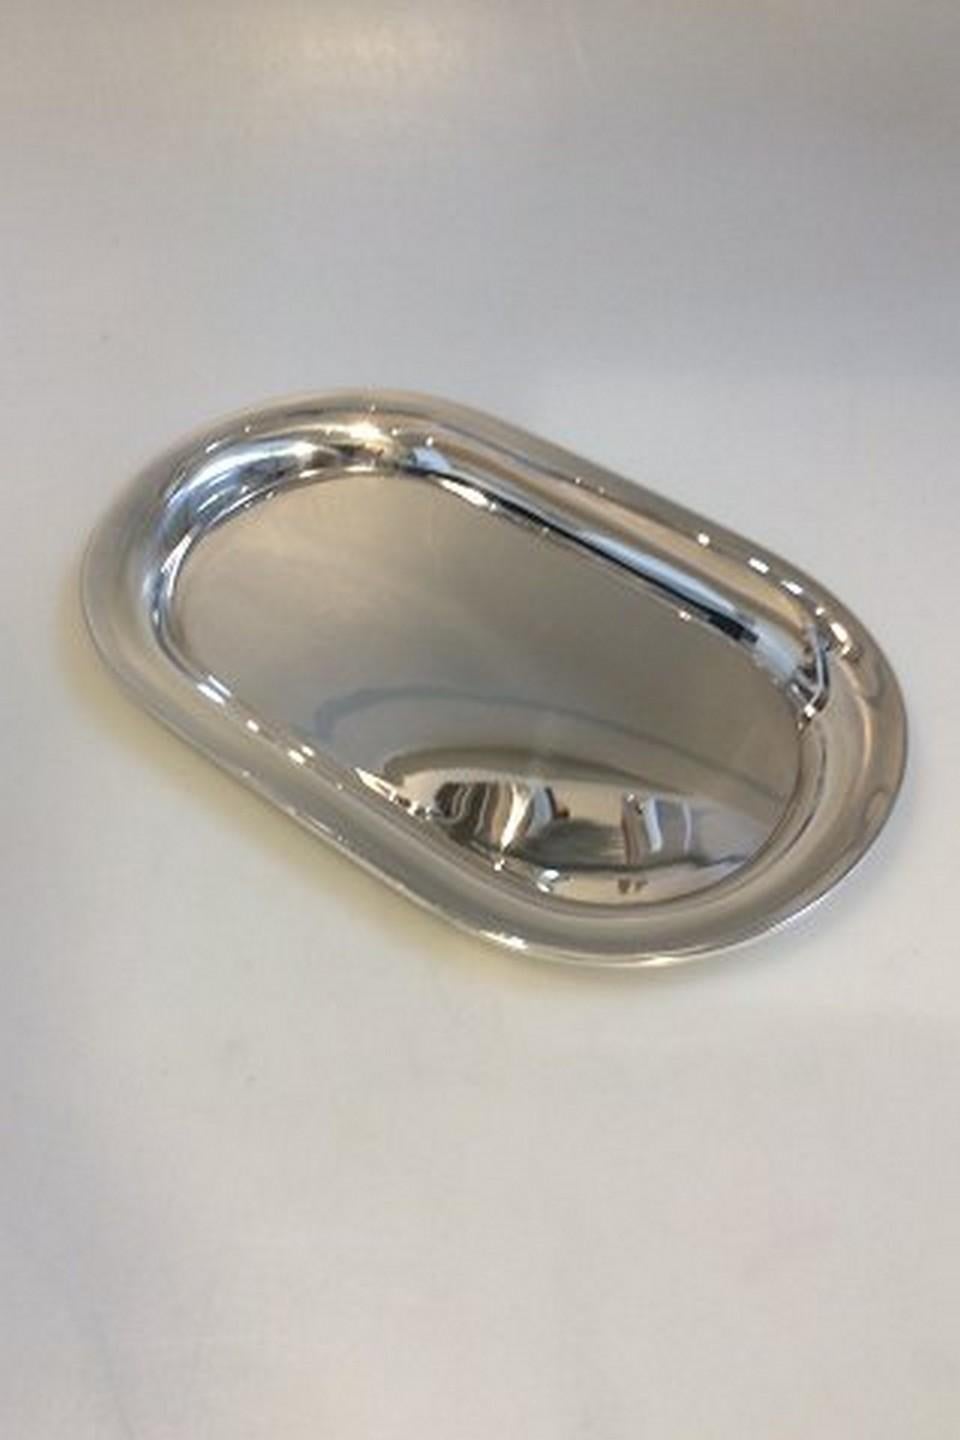 Hingelberg sterling silver tray by Svend Weihrauch

Measures: 29cm x 17.8cm (11.42